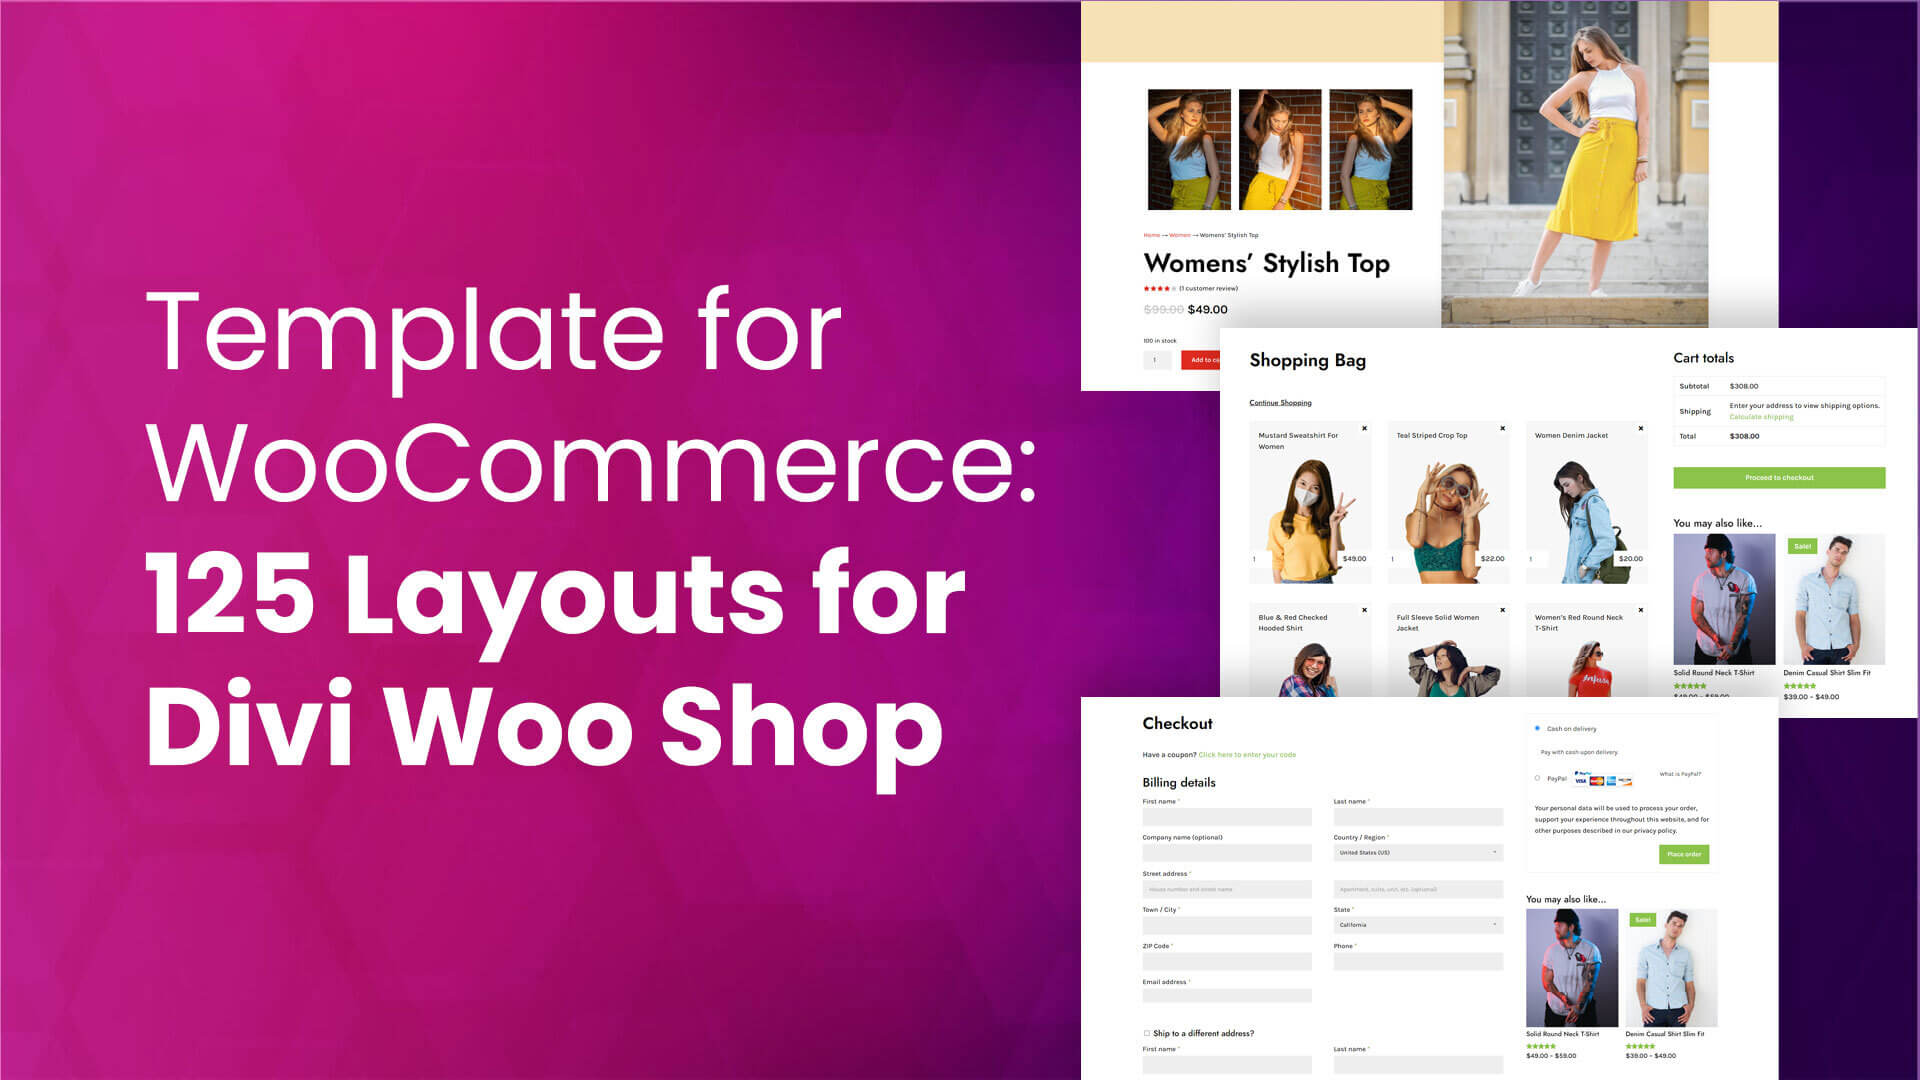 Template for WooCommerce